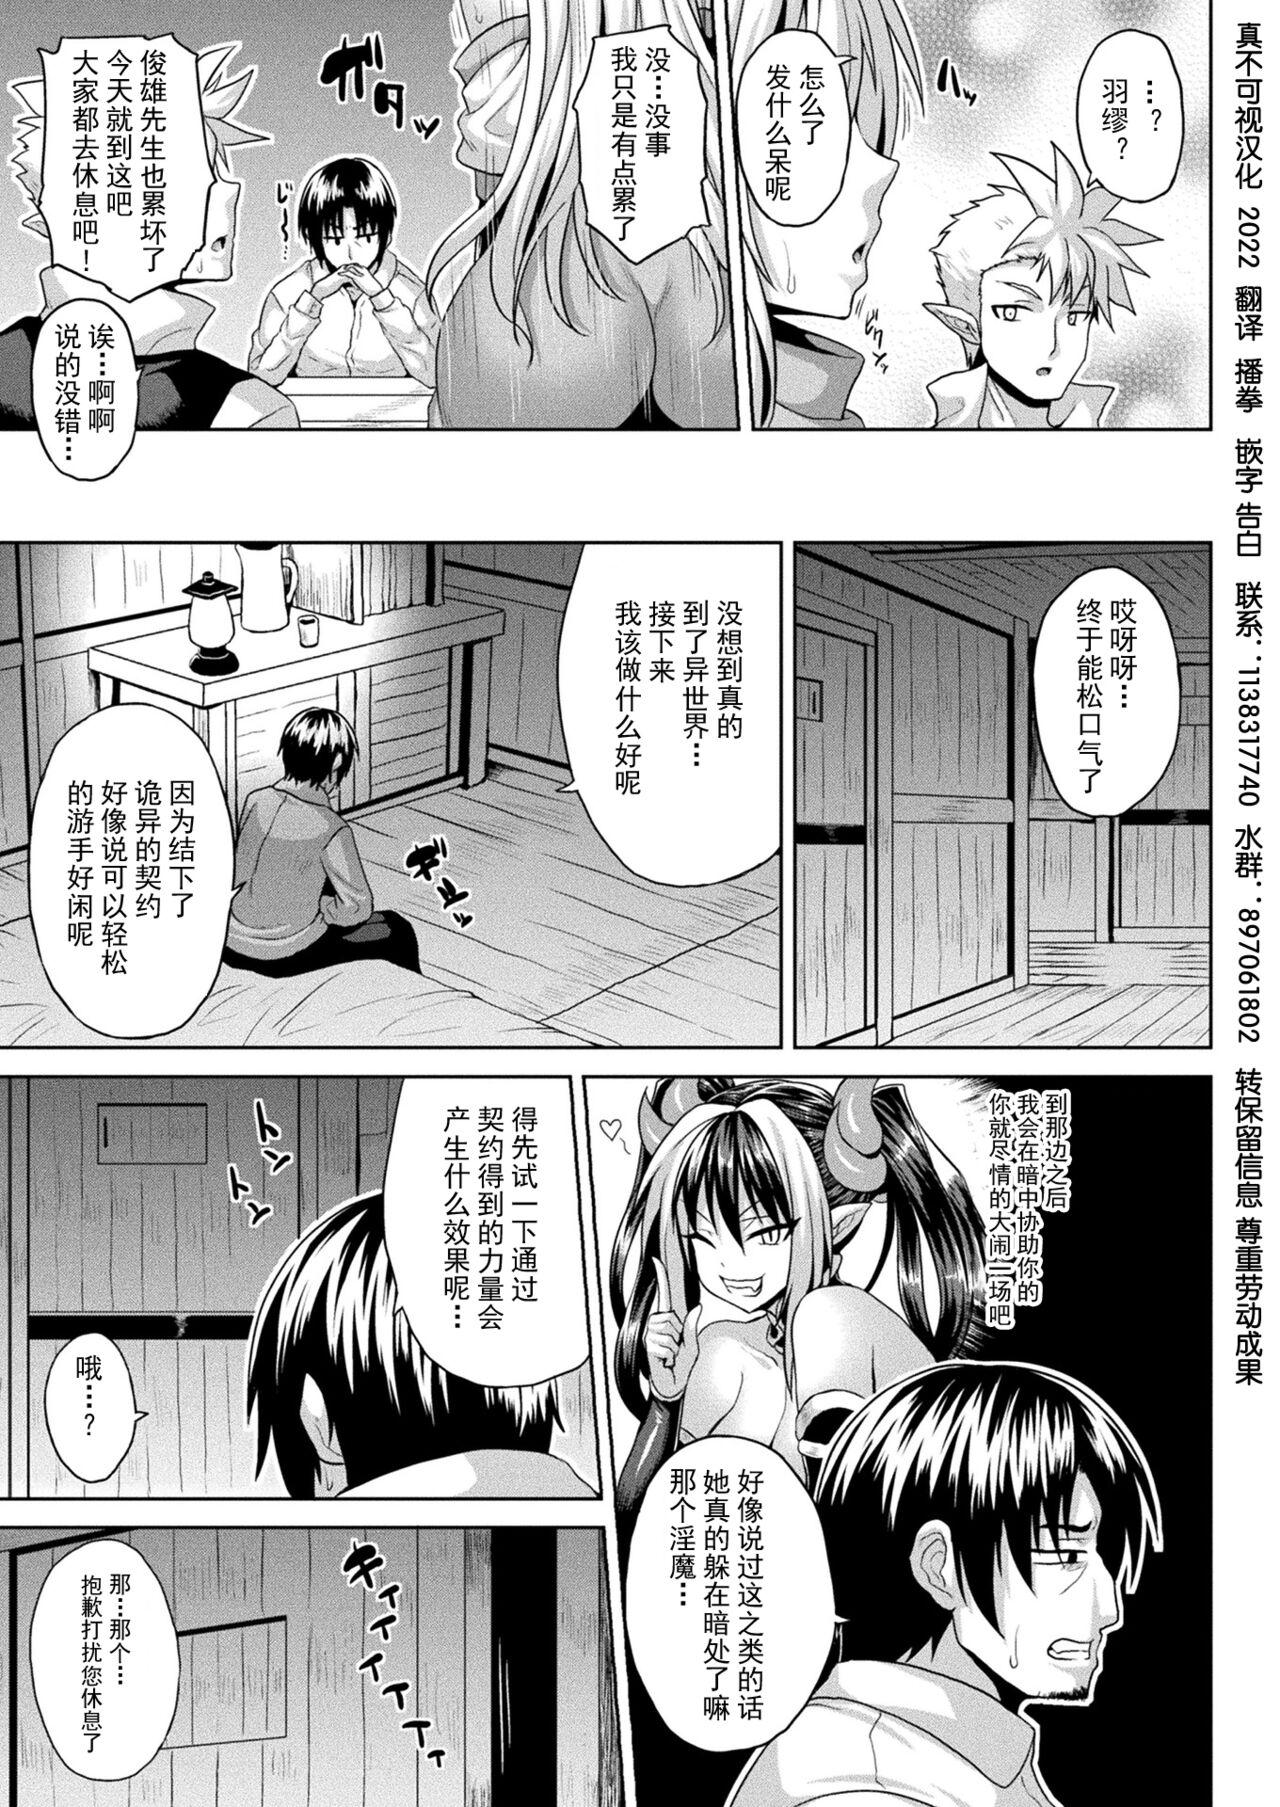 Real Amatuer Porn 異世界催淫わからせ紀行 ch.1-5+Act.FINAL Gay College - Page 3